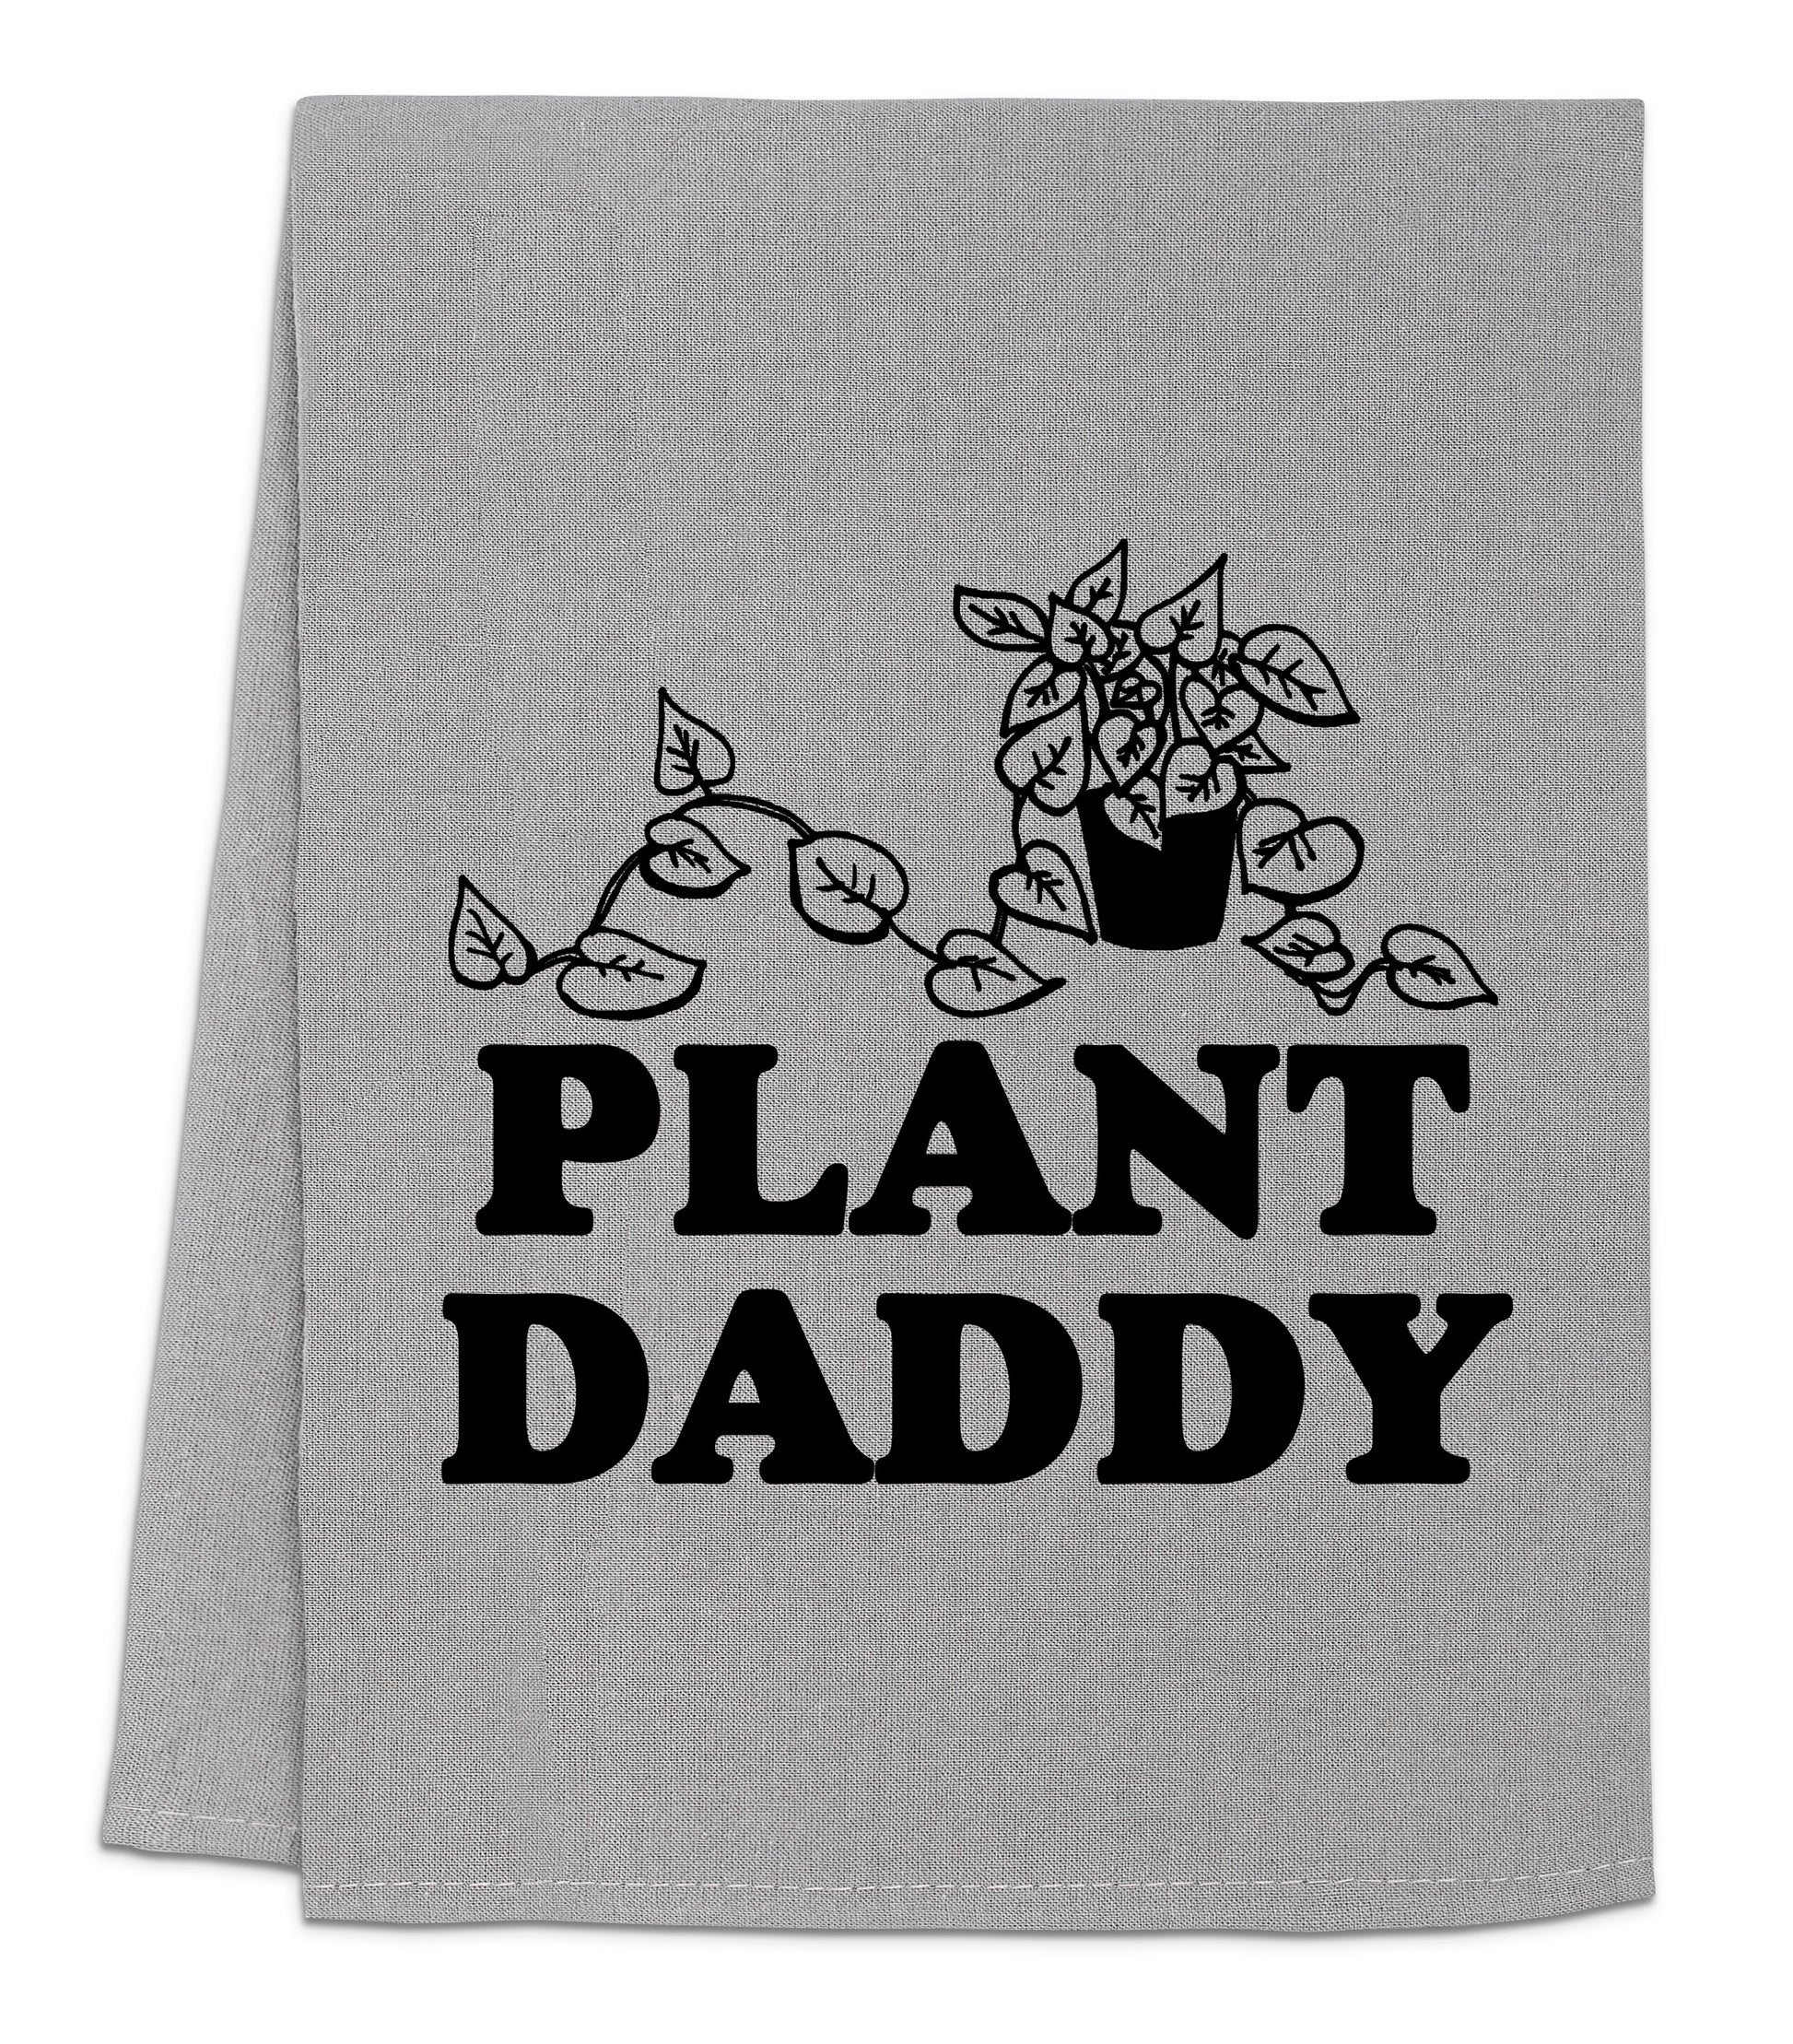 a gray towel with a plant daddy on it